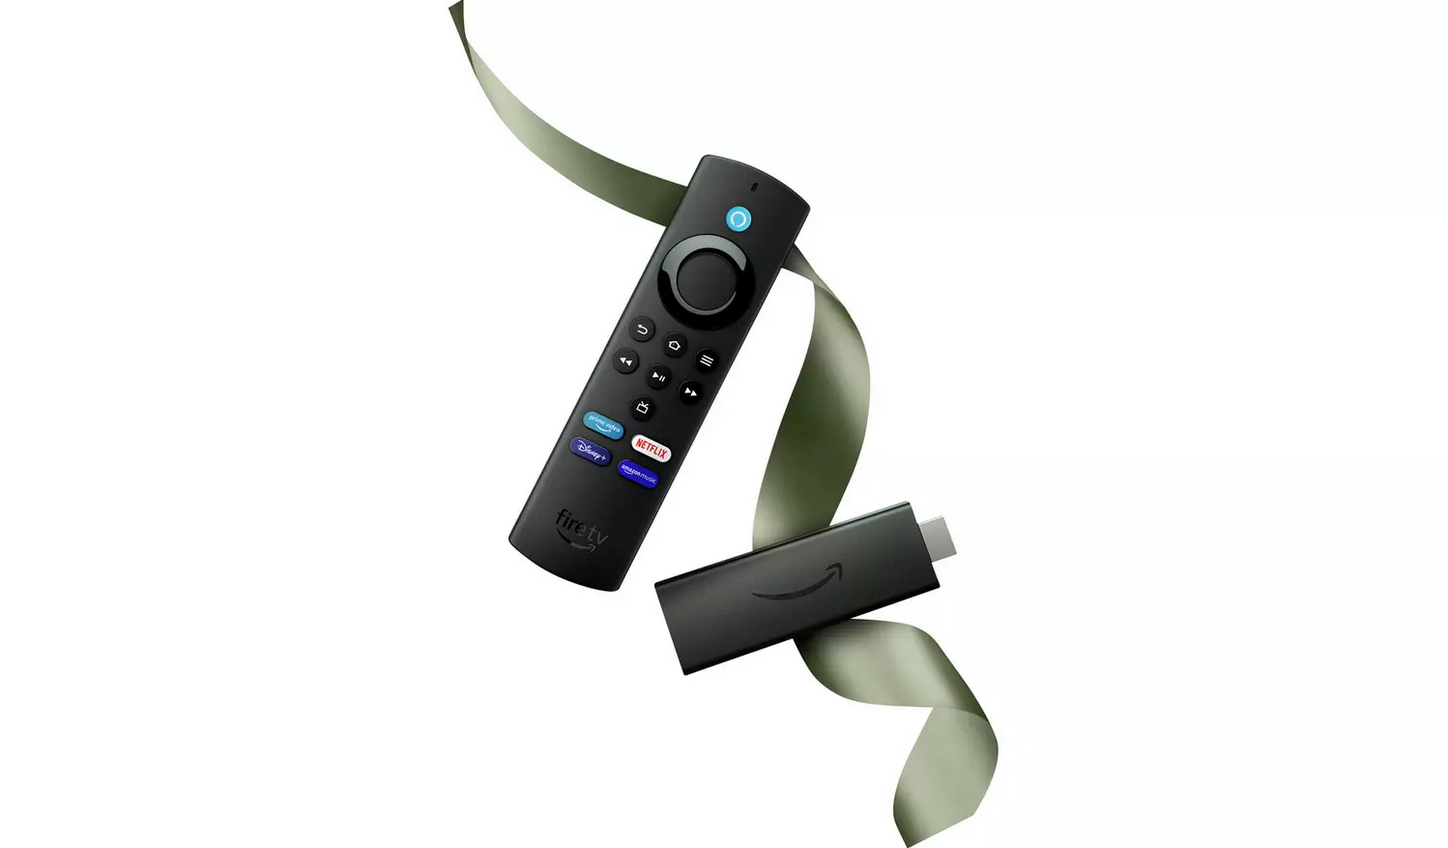 Fire TV Stick: Solving remote issues 